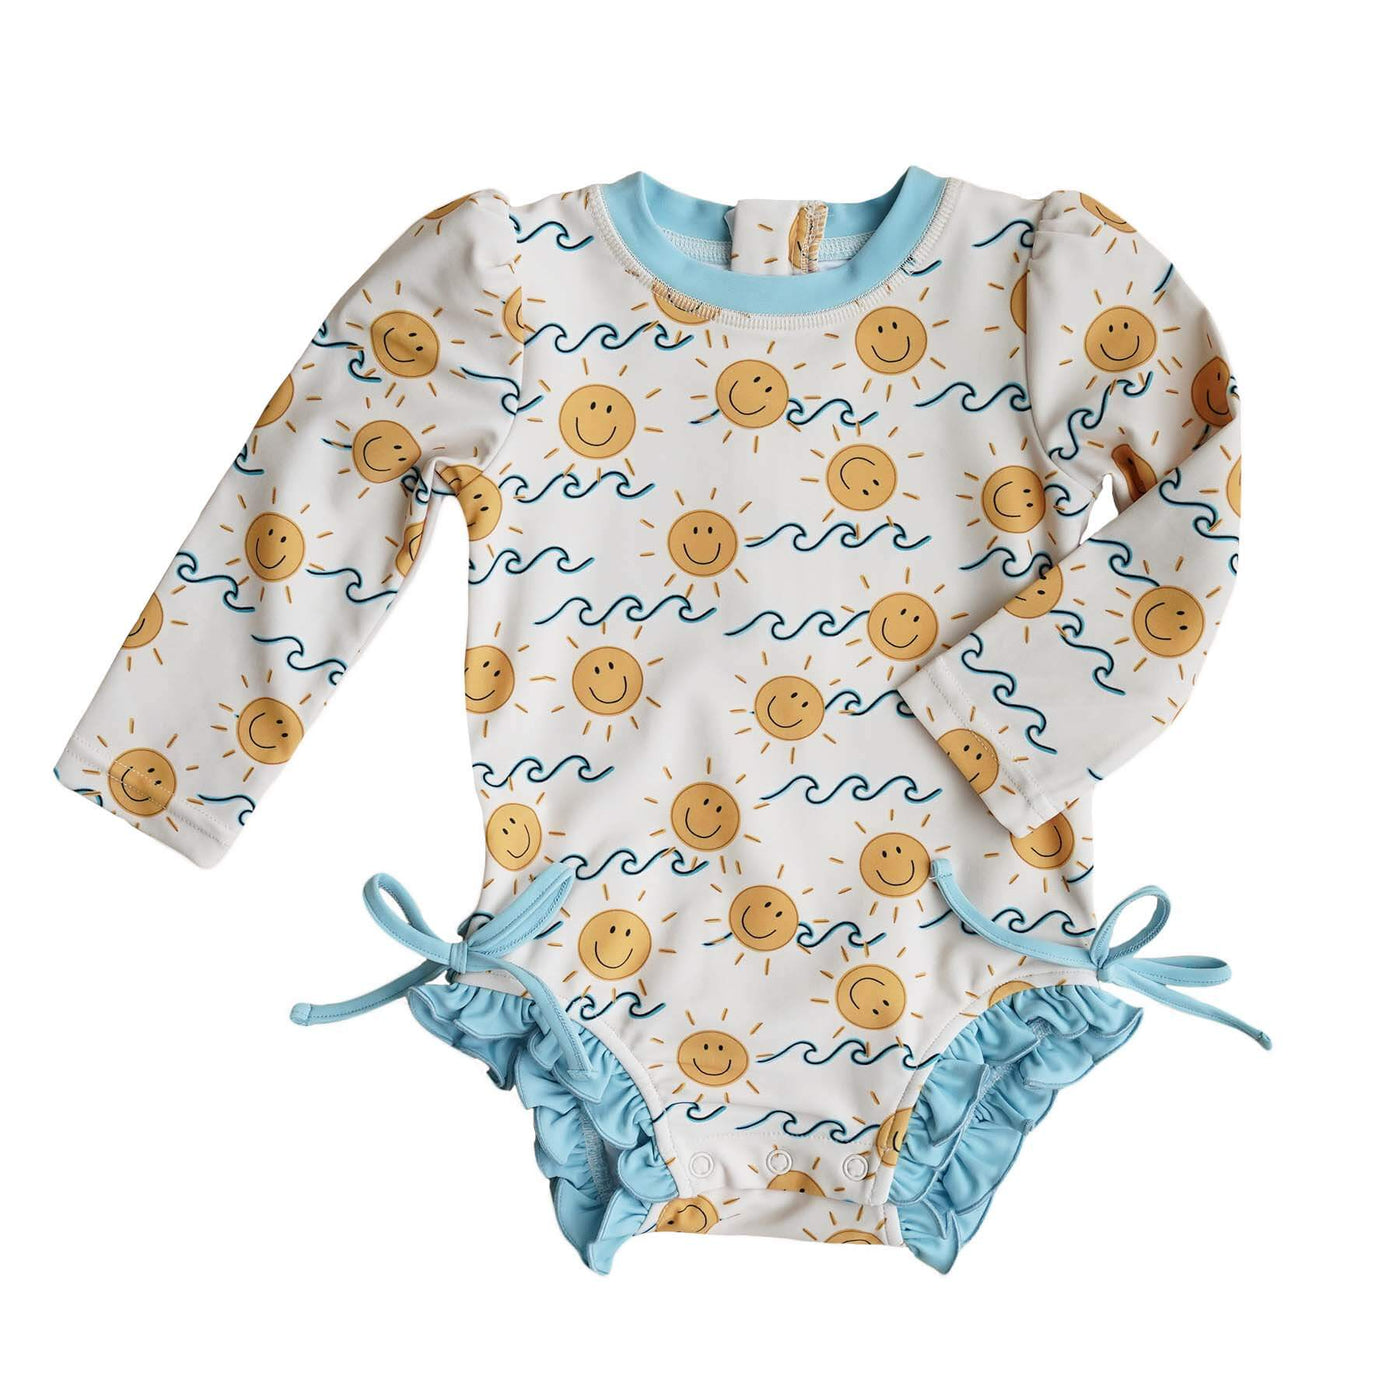 sun's out long sleeve rash guard swimsuit with ruffle bottom with waves and smiley faces